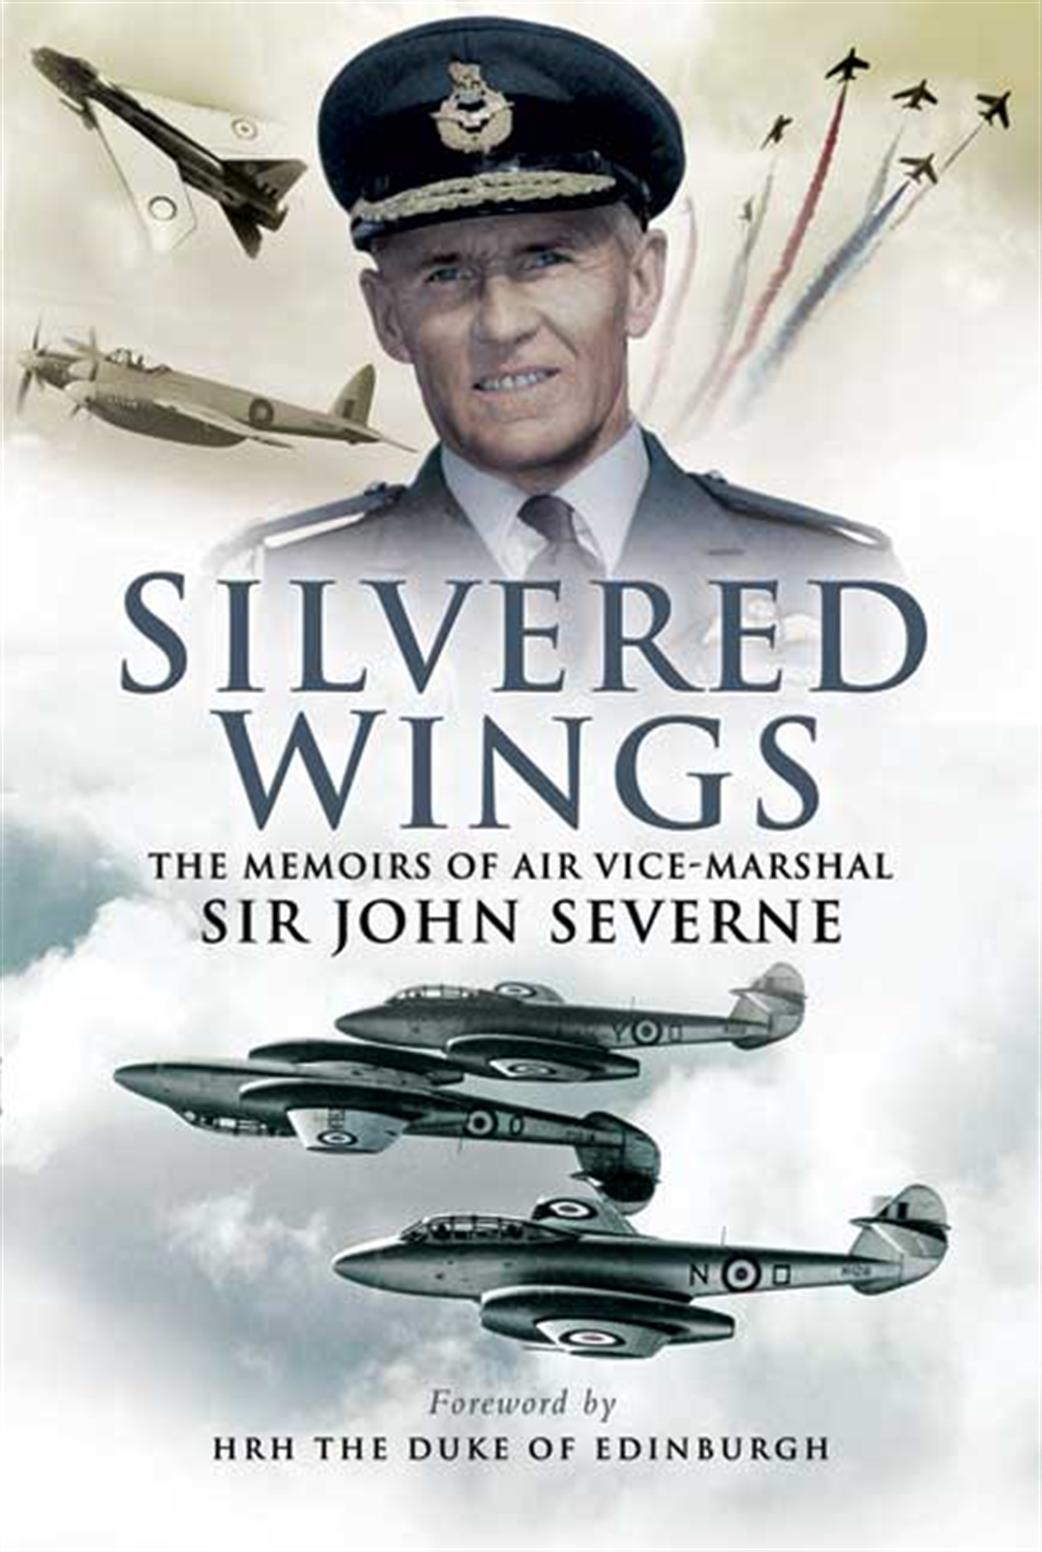 Pen & Sword  9781844155590 Silvered Wings Book by Air Vice-Marshal Sir John Severne.Frome